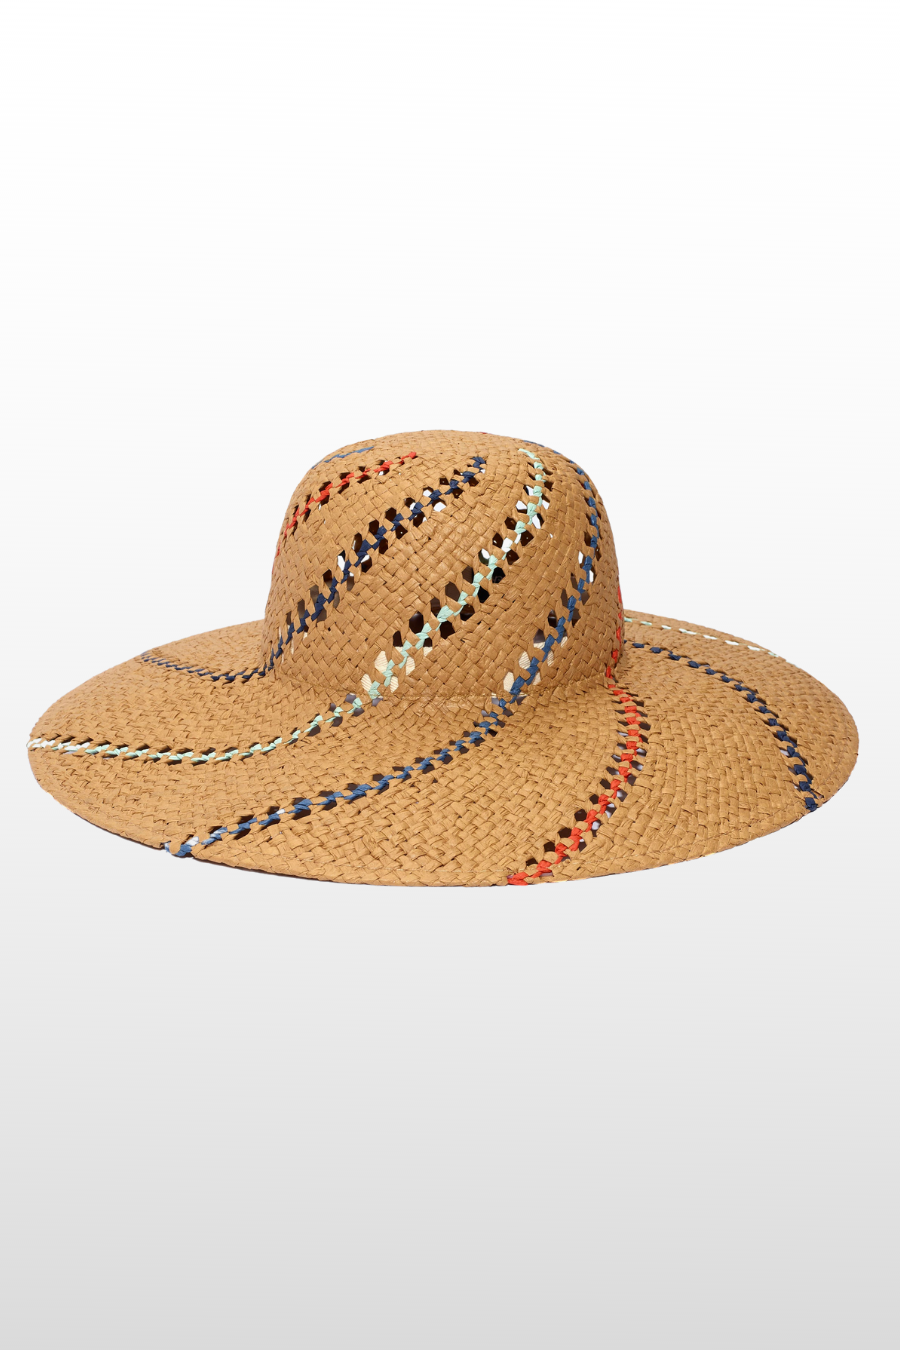 multistriped-sunhat.png